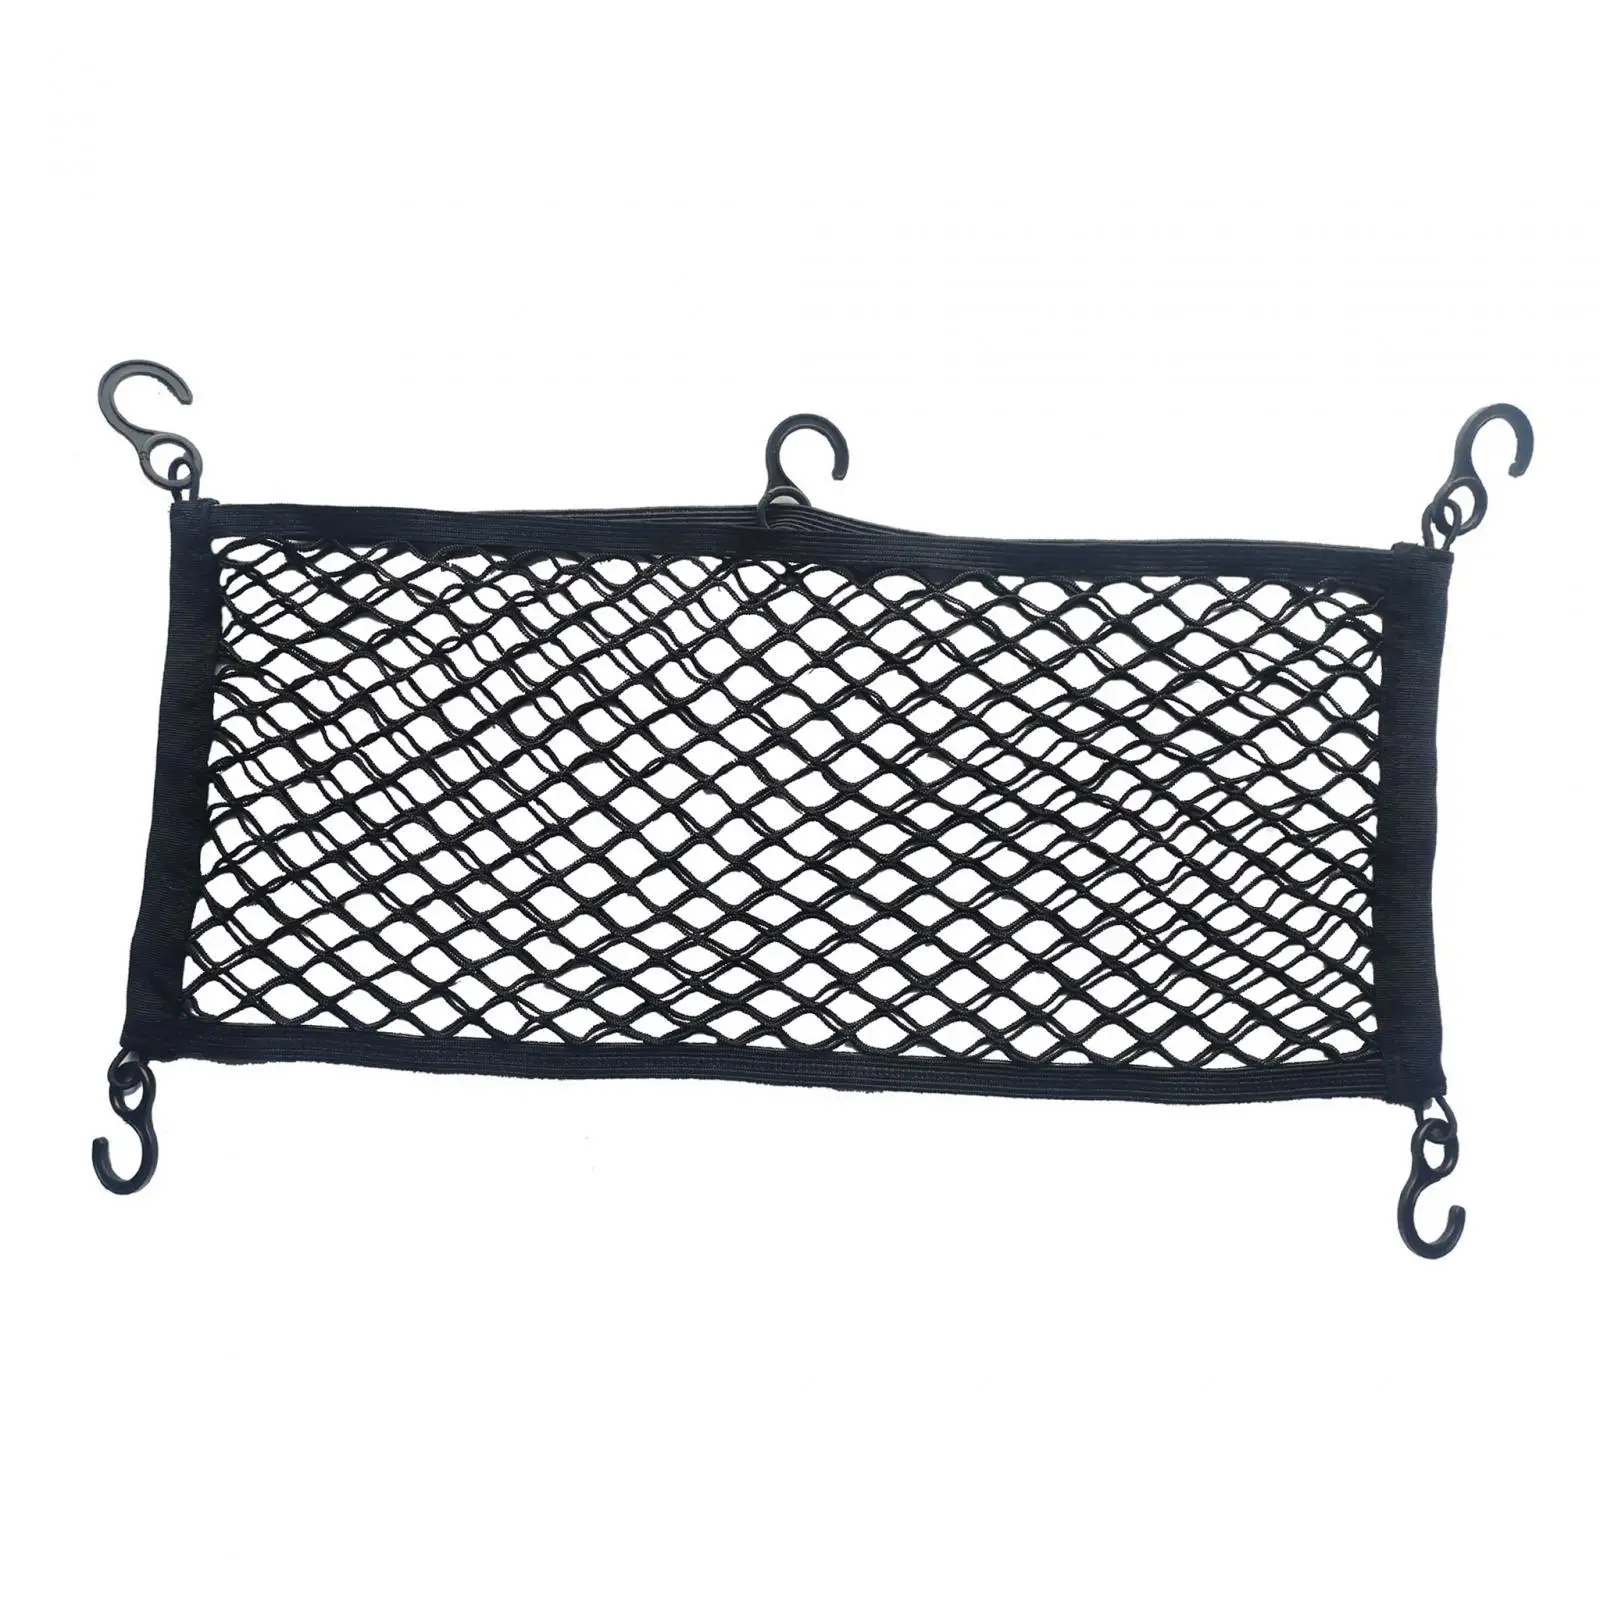 Folding Trolley Carts Net Elastic Outdoor Camping Carts with 5 Hooks Cargo Net for Cxxfeeding Bottles Carrying Diaper Water Cups